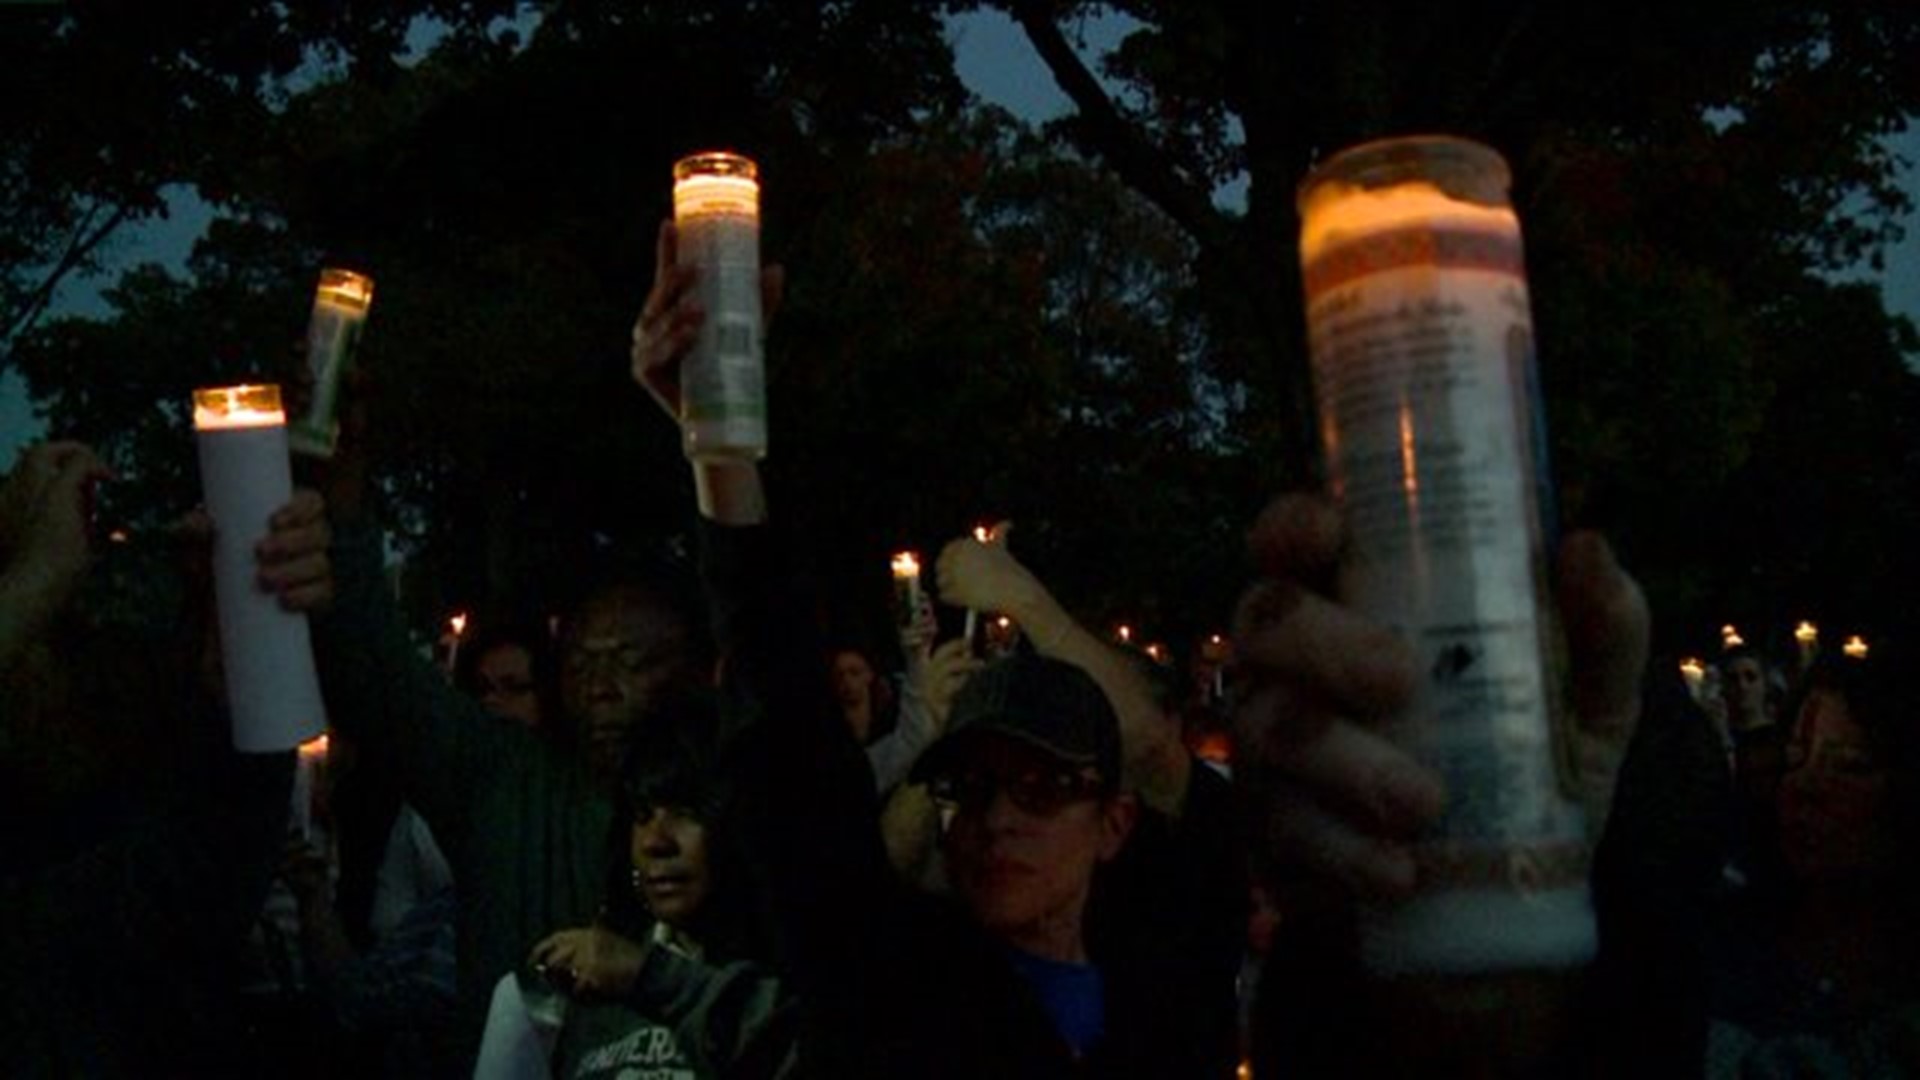 Candlelight vigil held for accident victims in Meriden